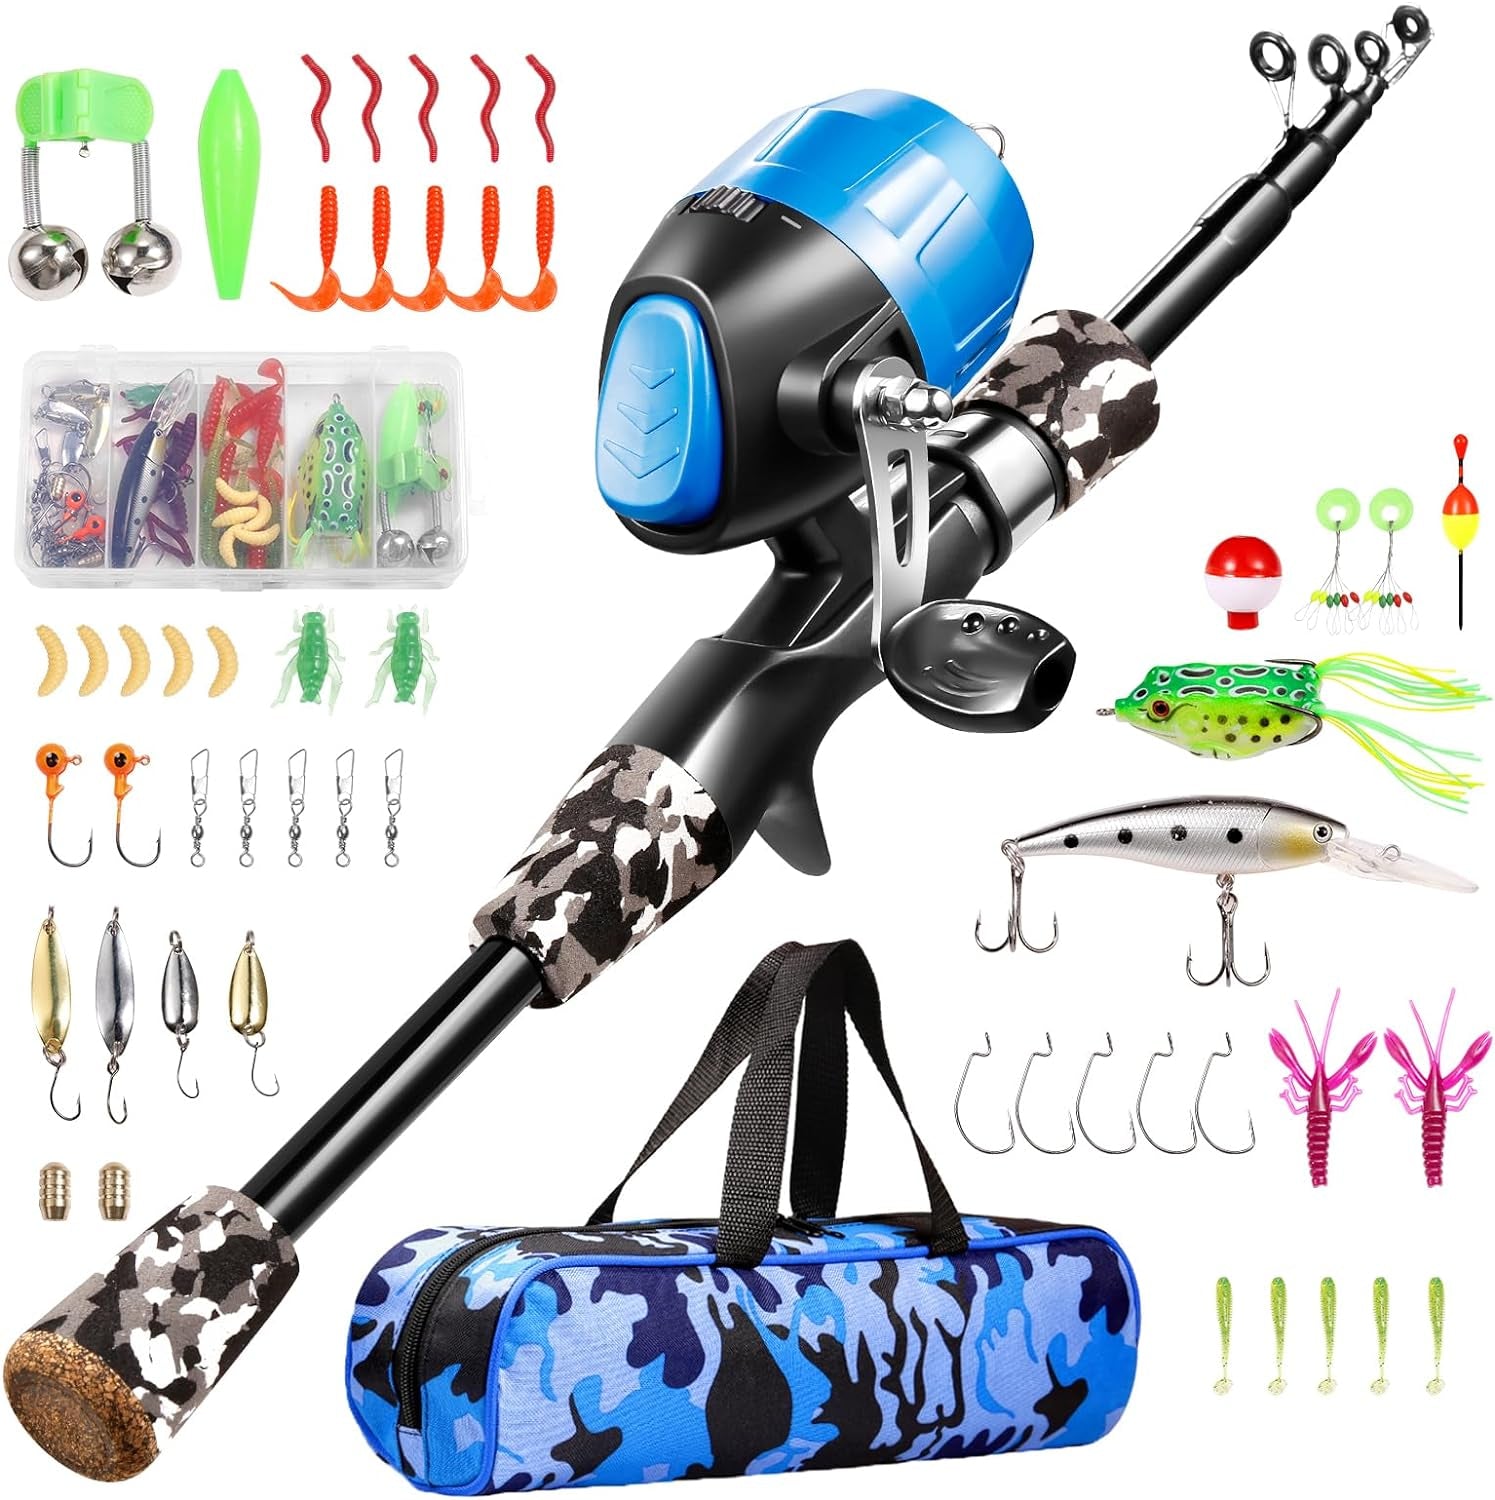 Kids Fishing Pole - Telescopic Fishing Rod and Reel Combo Kit - Fishing Gear, Fishing Lures, Carry on Bag, 70 Set Fully Fishing Equipment - for Boys, Girls, Youth